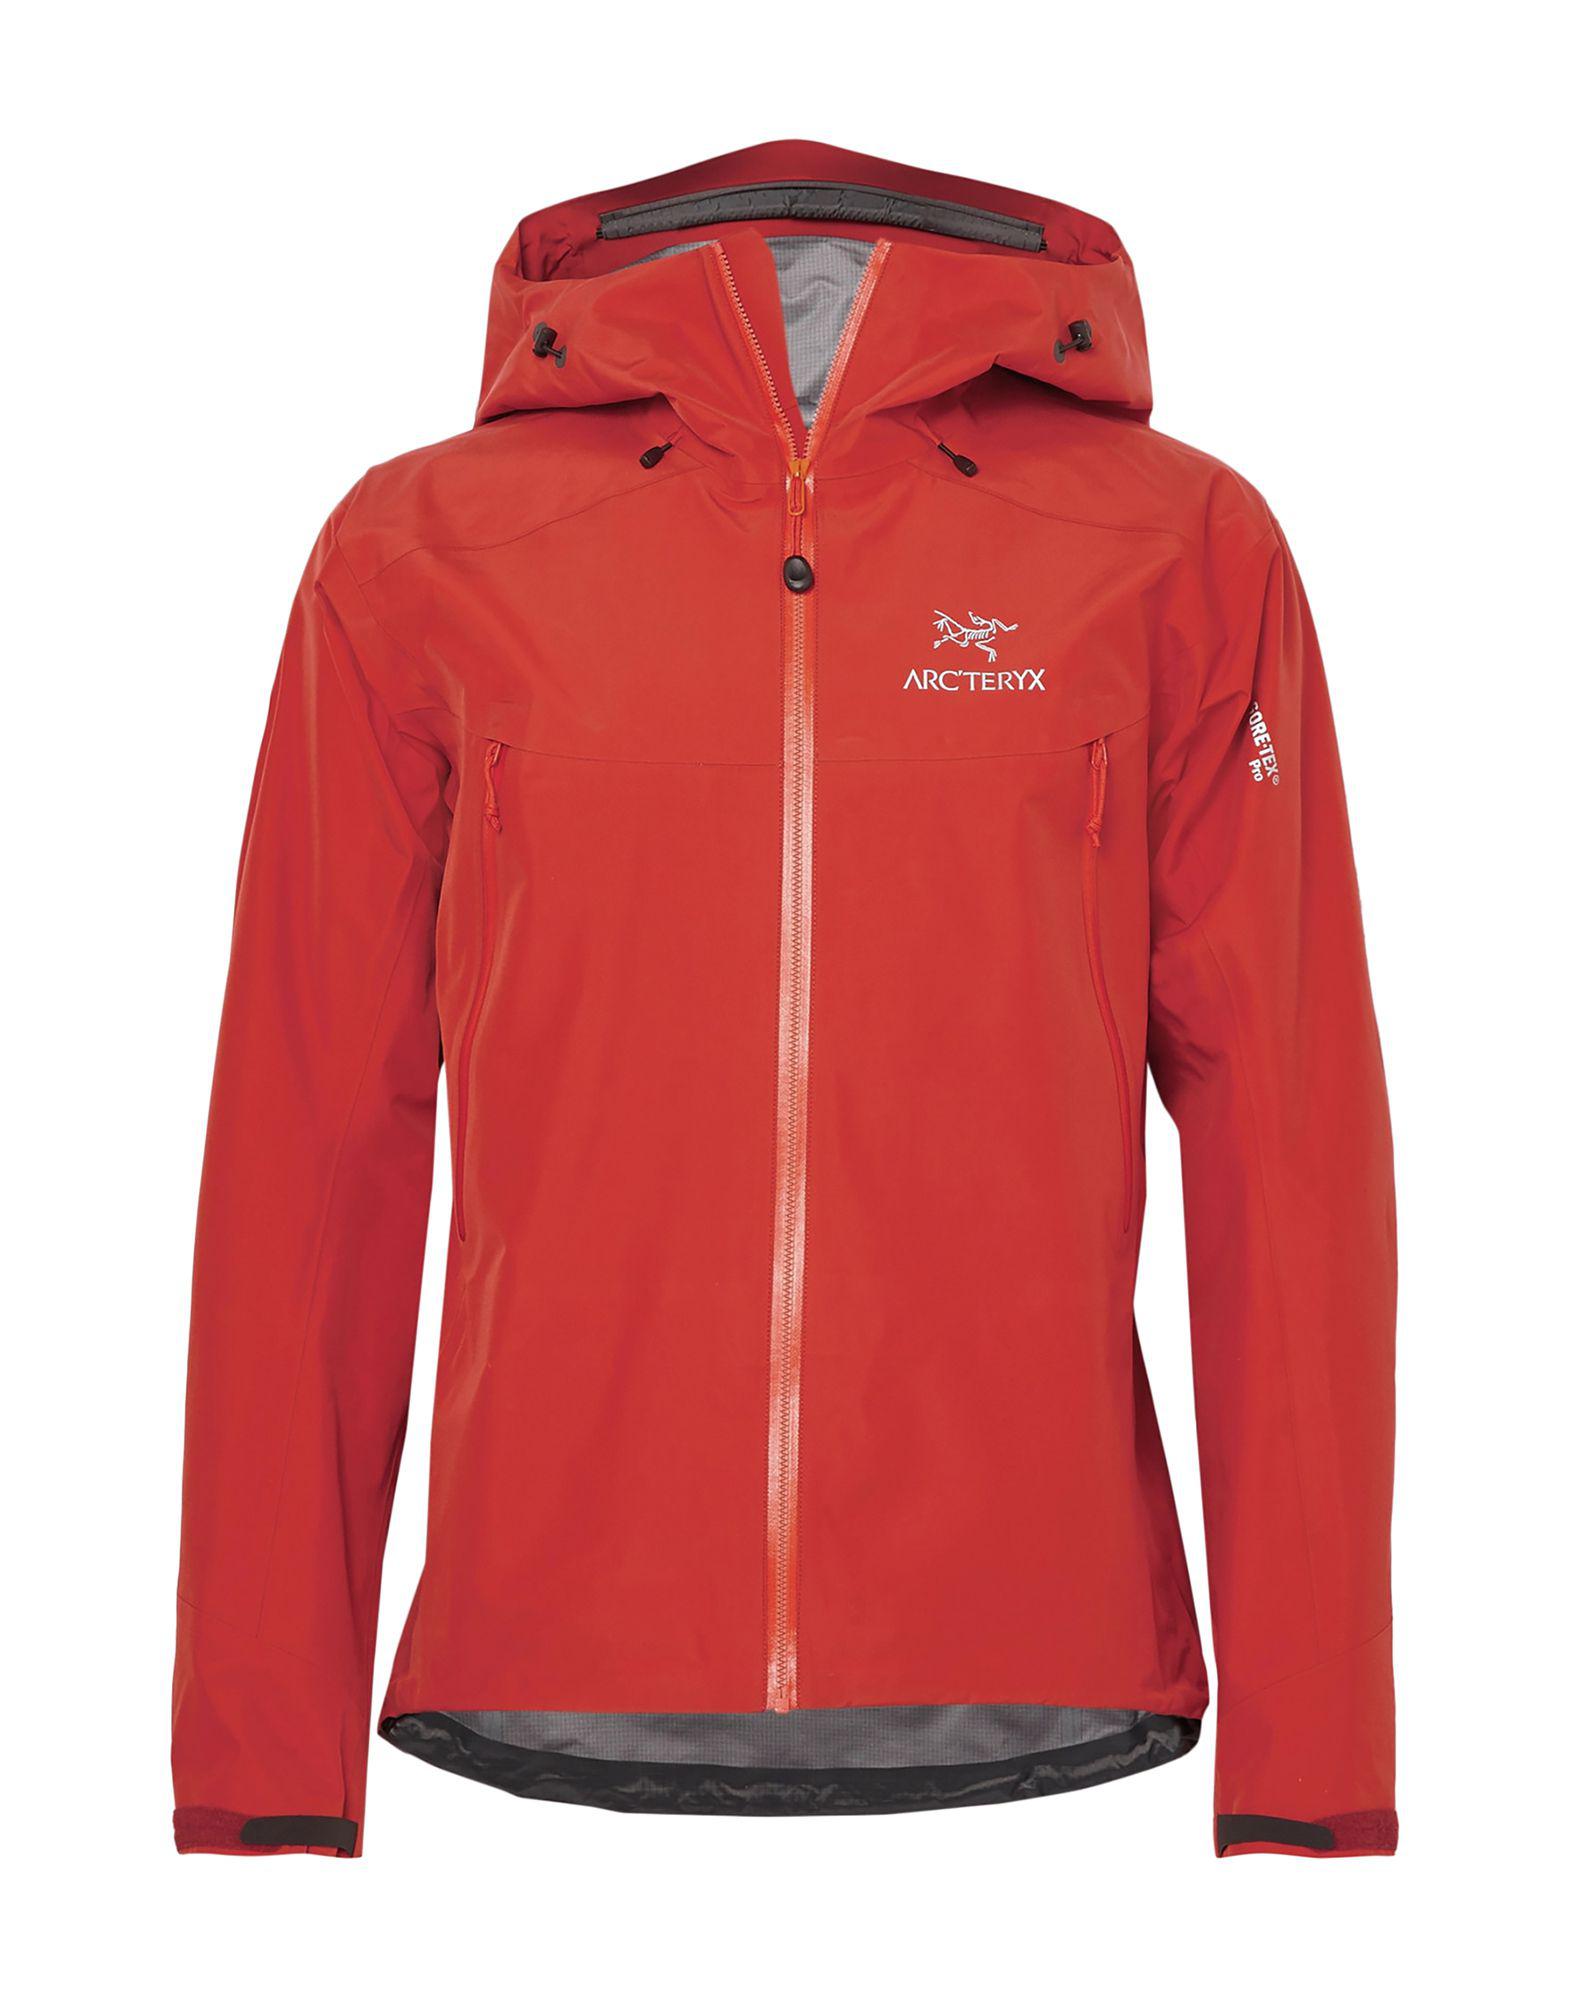 Arc'teryx Synthetic Jacket in Rust (Red) for Men - Lyst